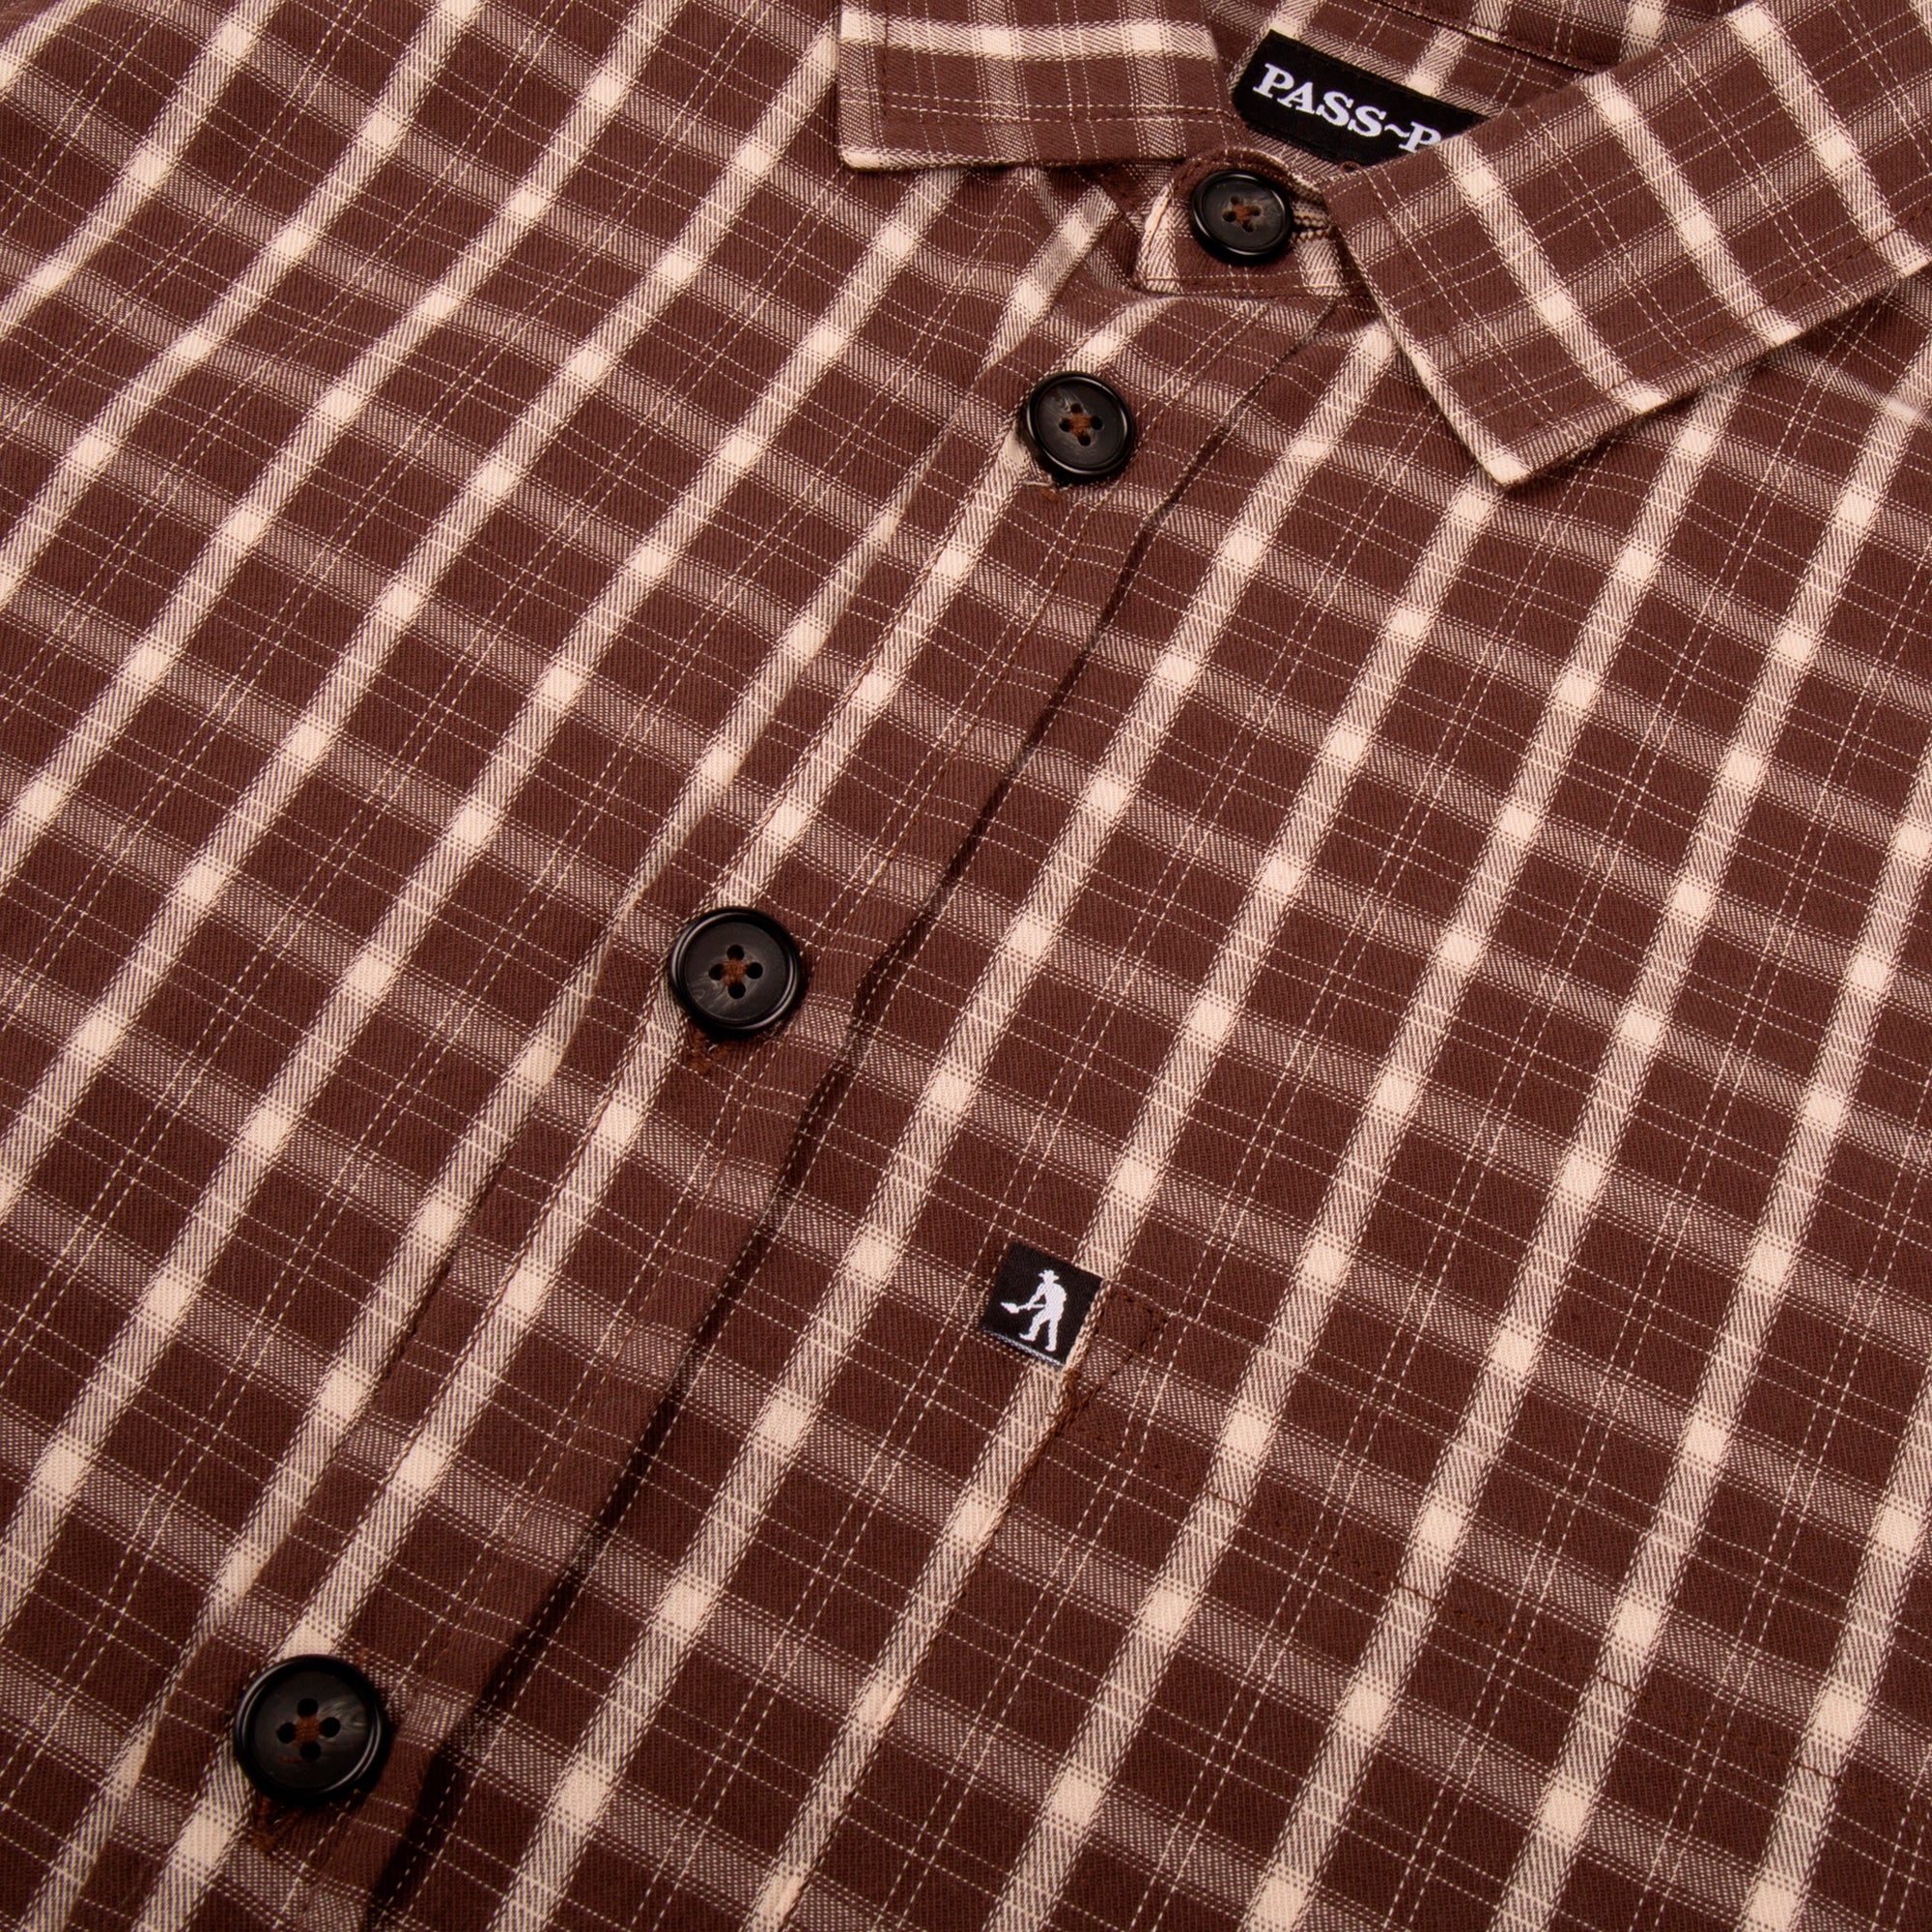 Workers Check Shirt S/S (Brown) – PASS~PORT-EU